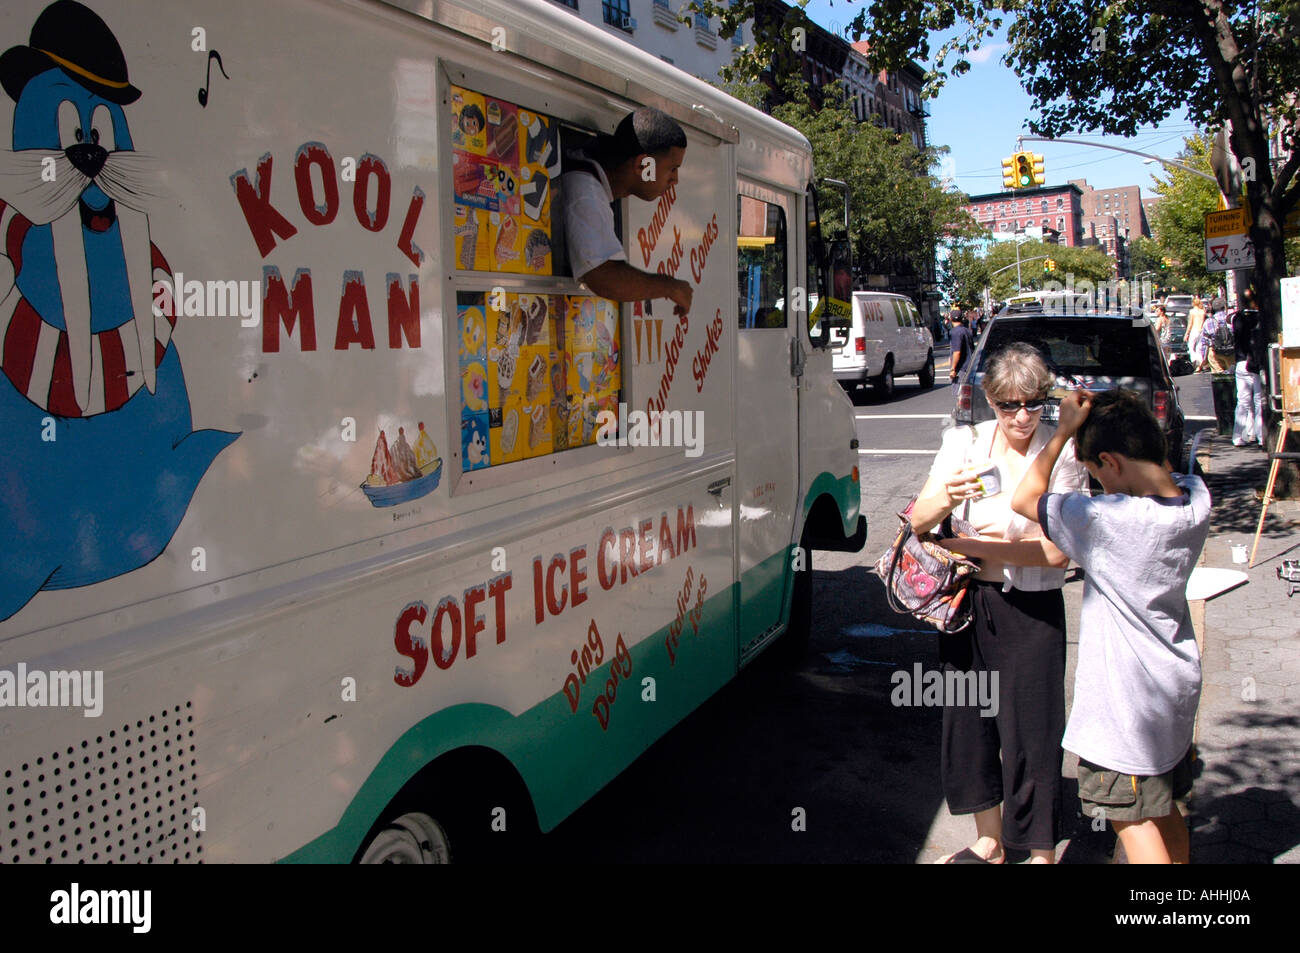 A Kool Man Soft Ice Cream Truck Parks On Avenue A In New York City S East Village Serving Frozen Treats To Customers On A Hot Day Stock Photo Alamy